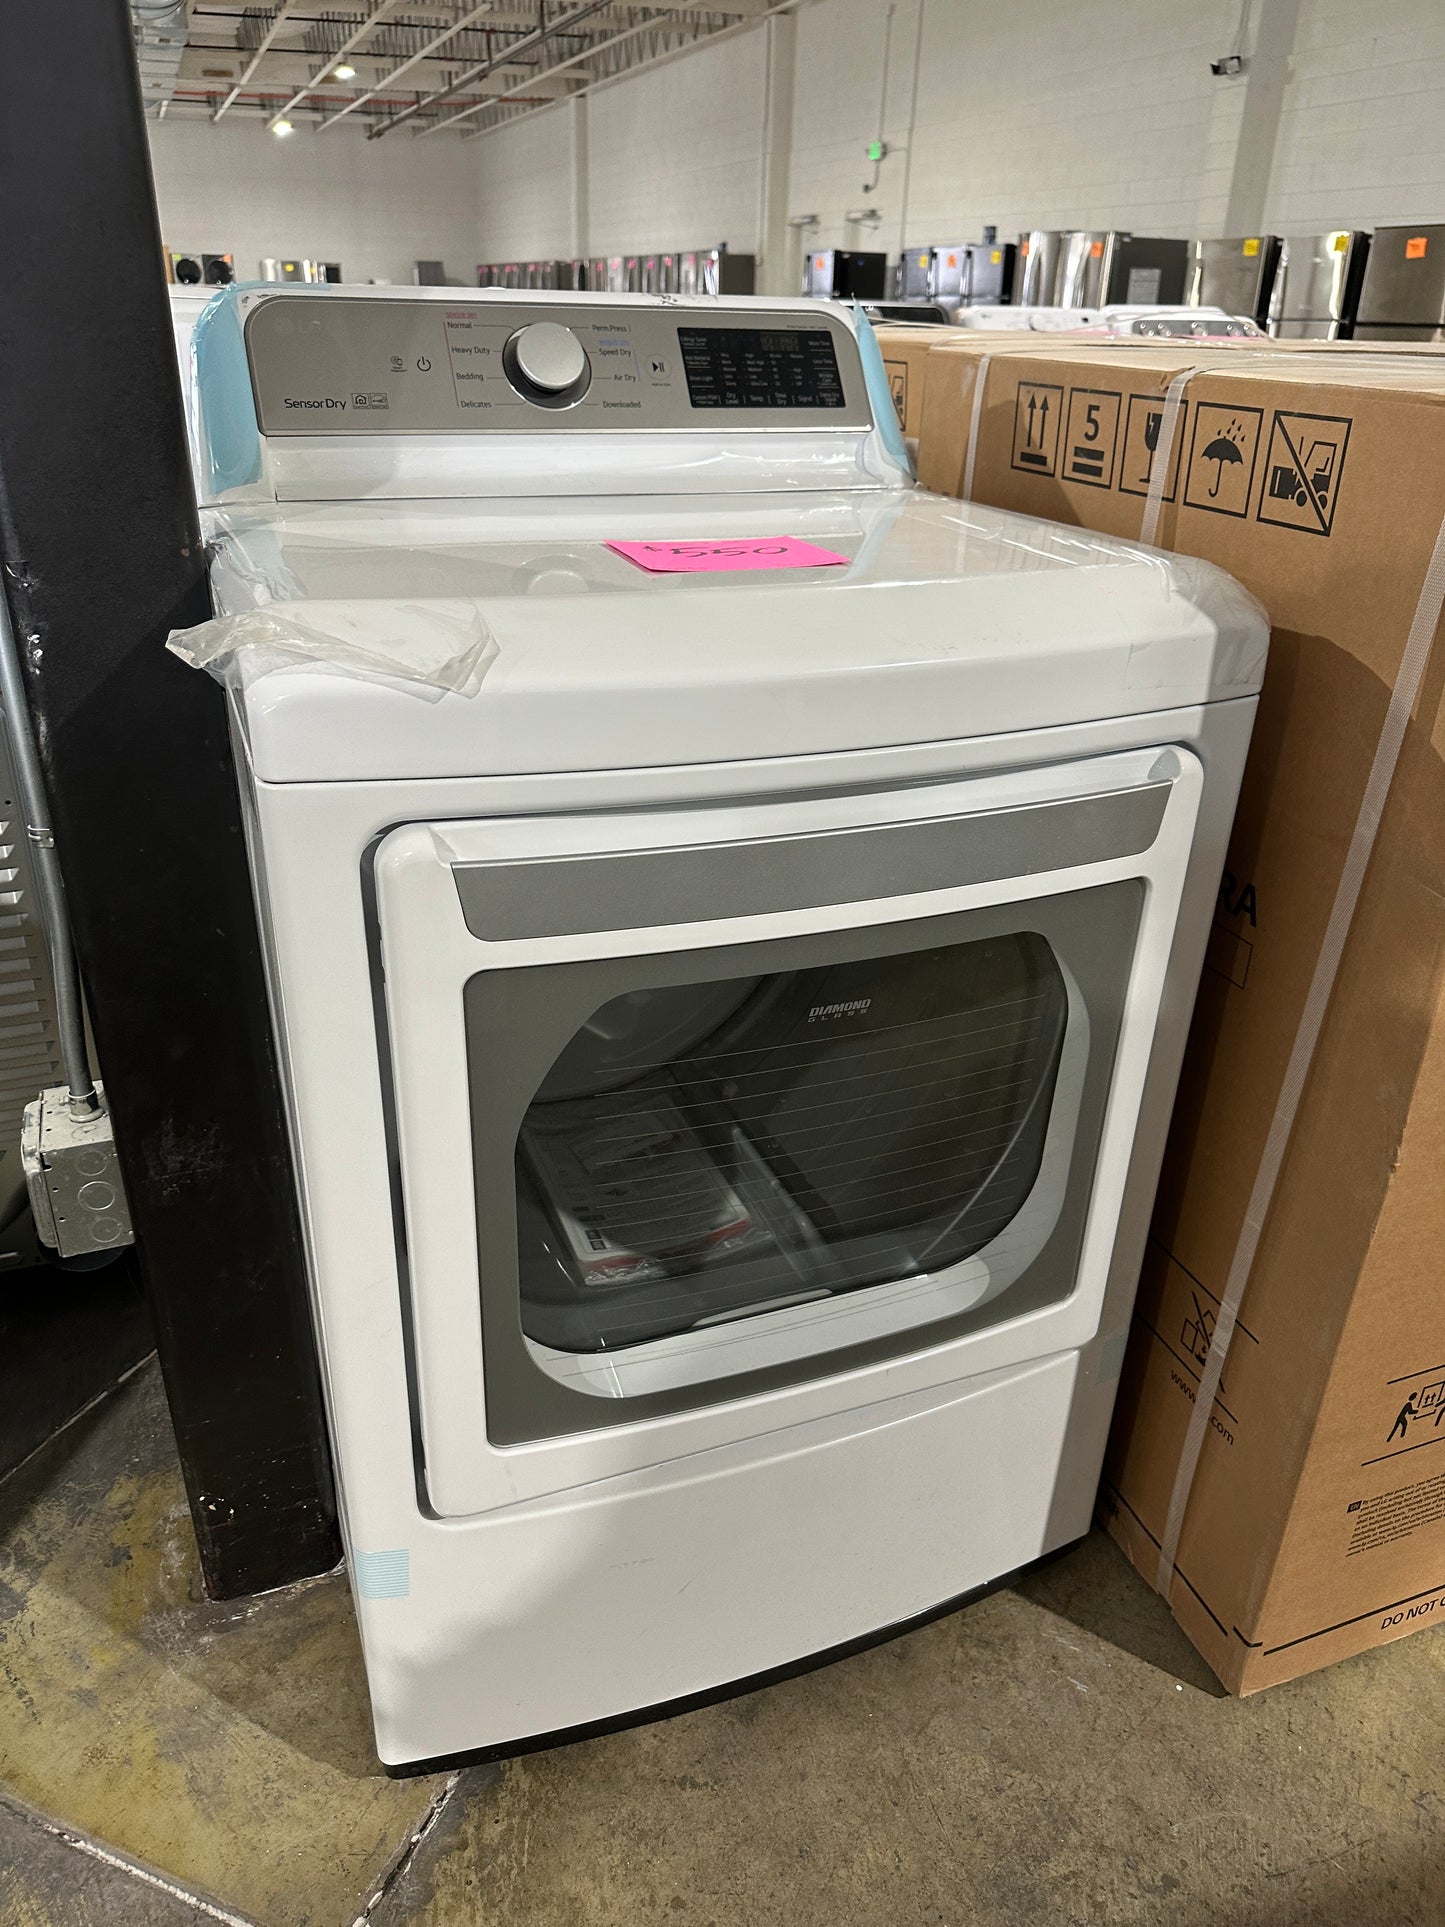 NEW LG SMART ELECTRIC LG DRYER - DRY11451S DLE7300WE